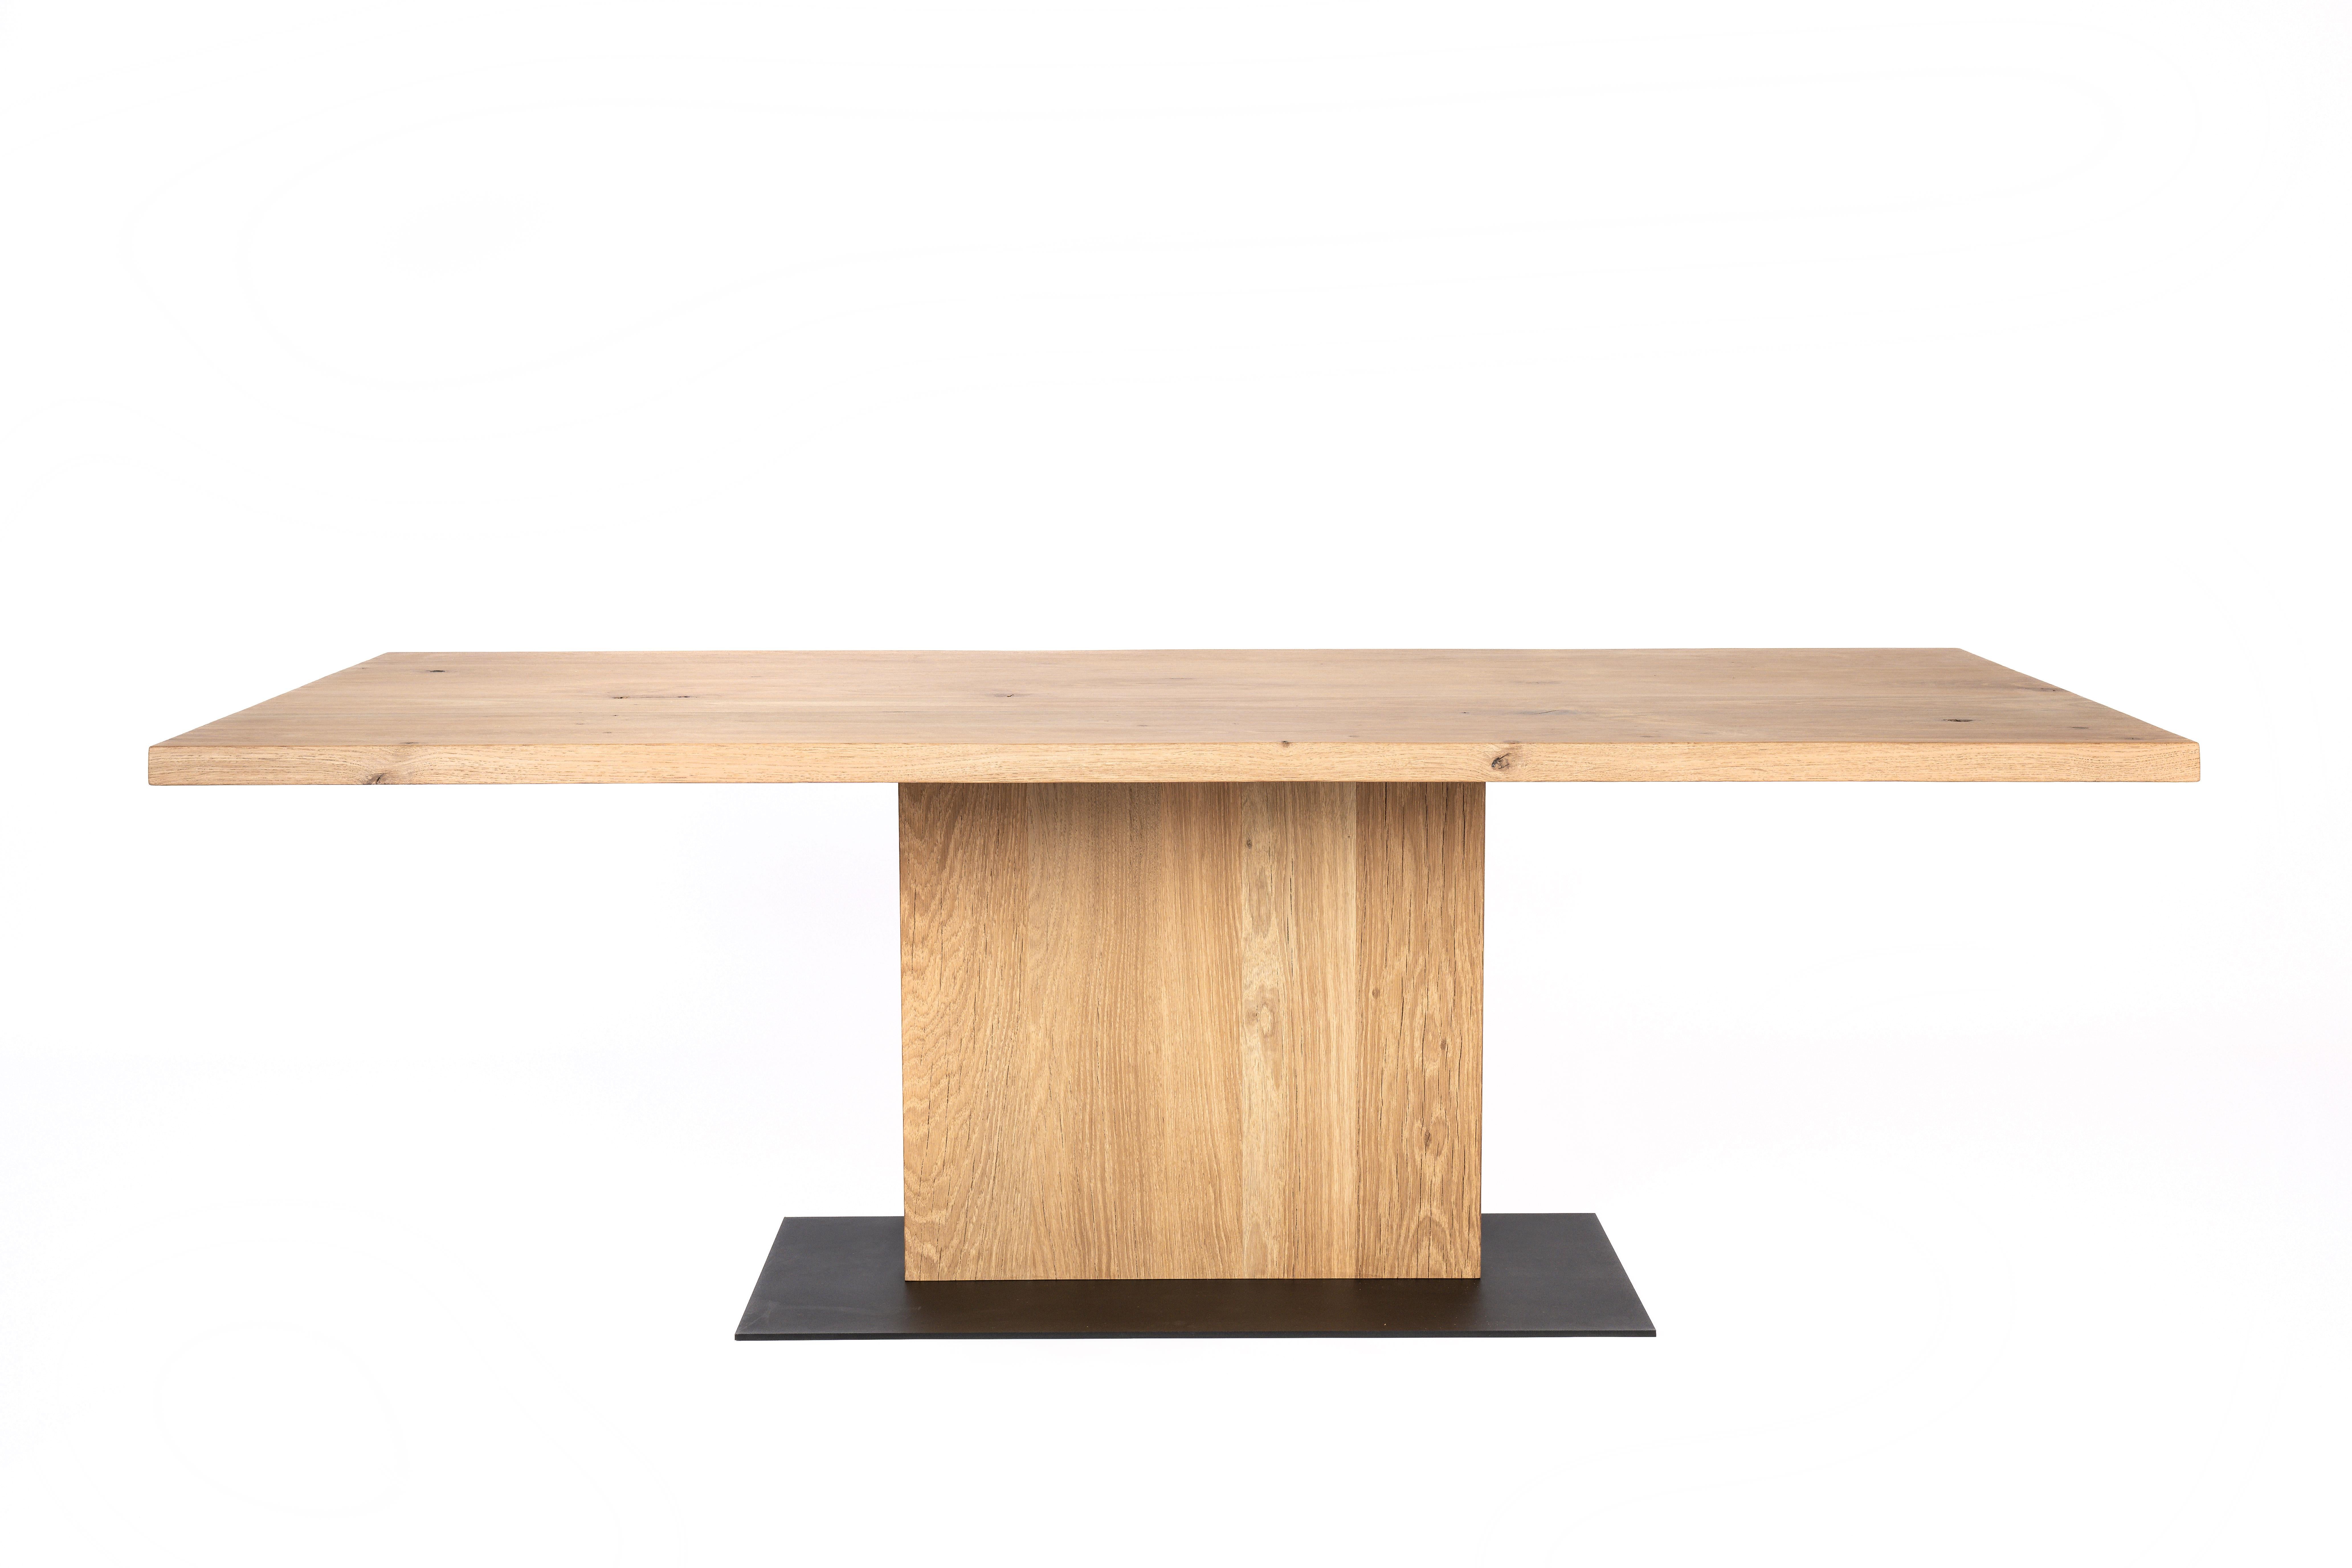 Introducing our Modern Rustic dining table with a floating top—a fusion of contemporary aesthetics and artisanal craftsmanship designed to elevate your dining area.
Crafted from solid baked oak with a natural rustic finish and a live edge, the